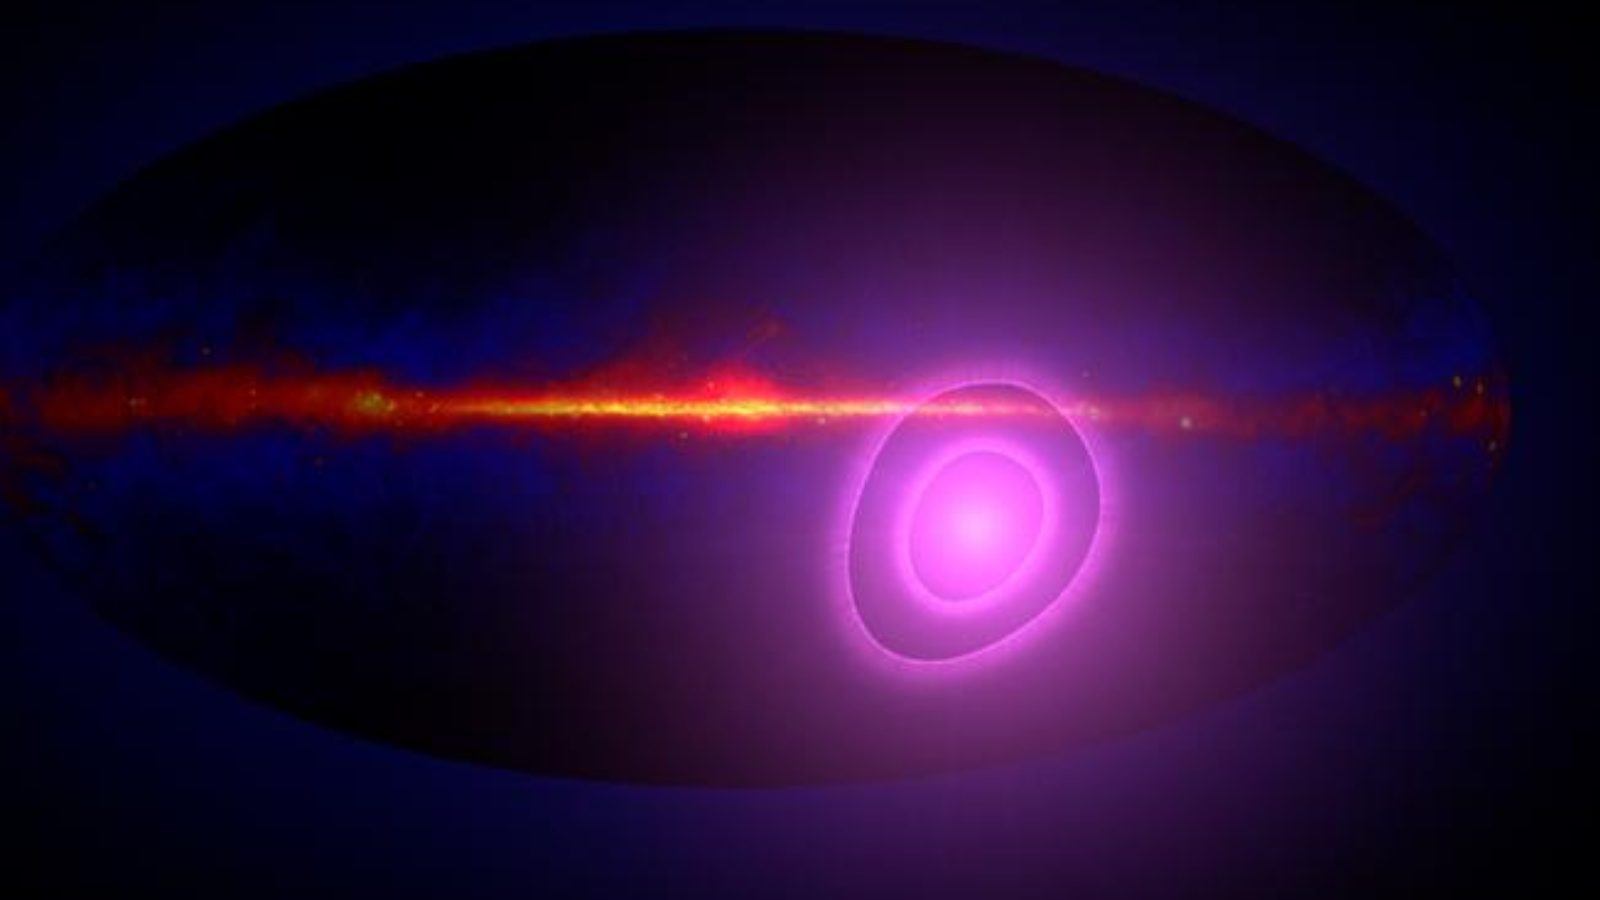 Surprise gamma-ray discovery could shed light on cosmic mystery Space